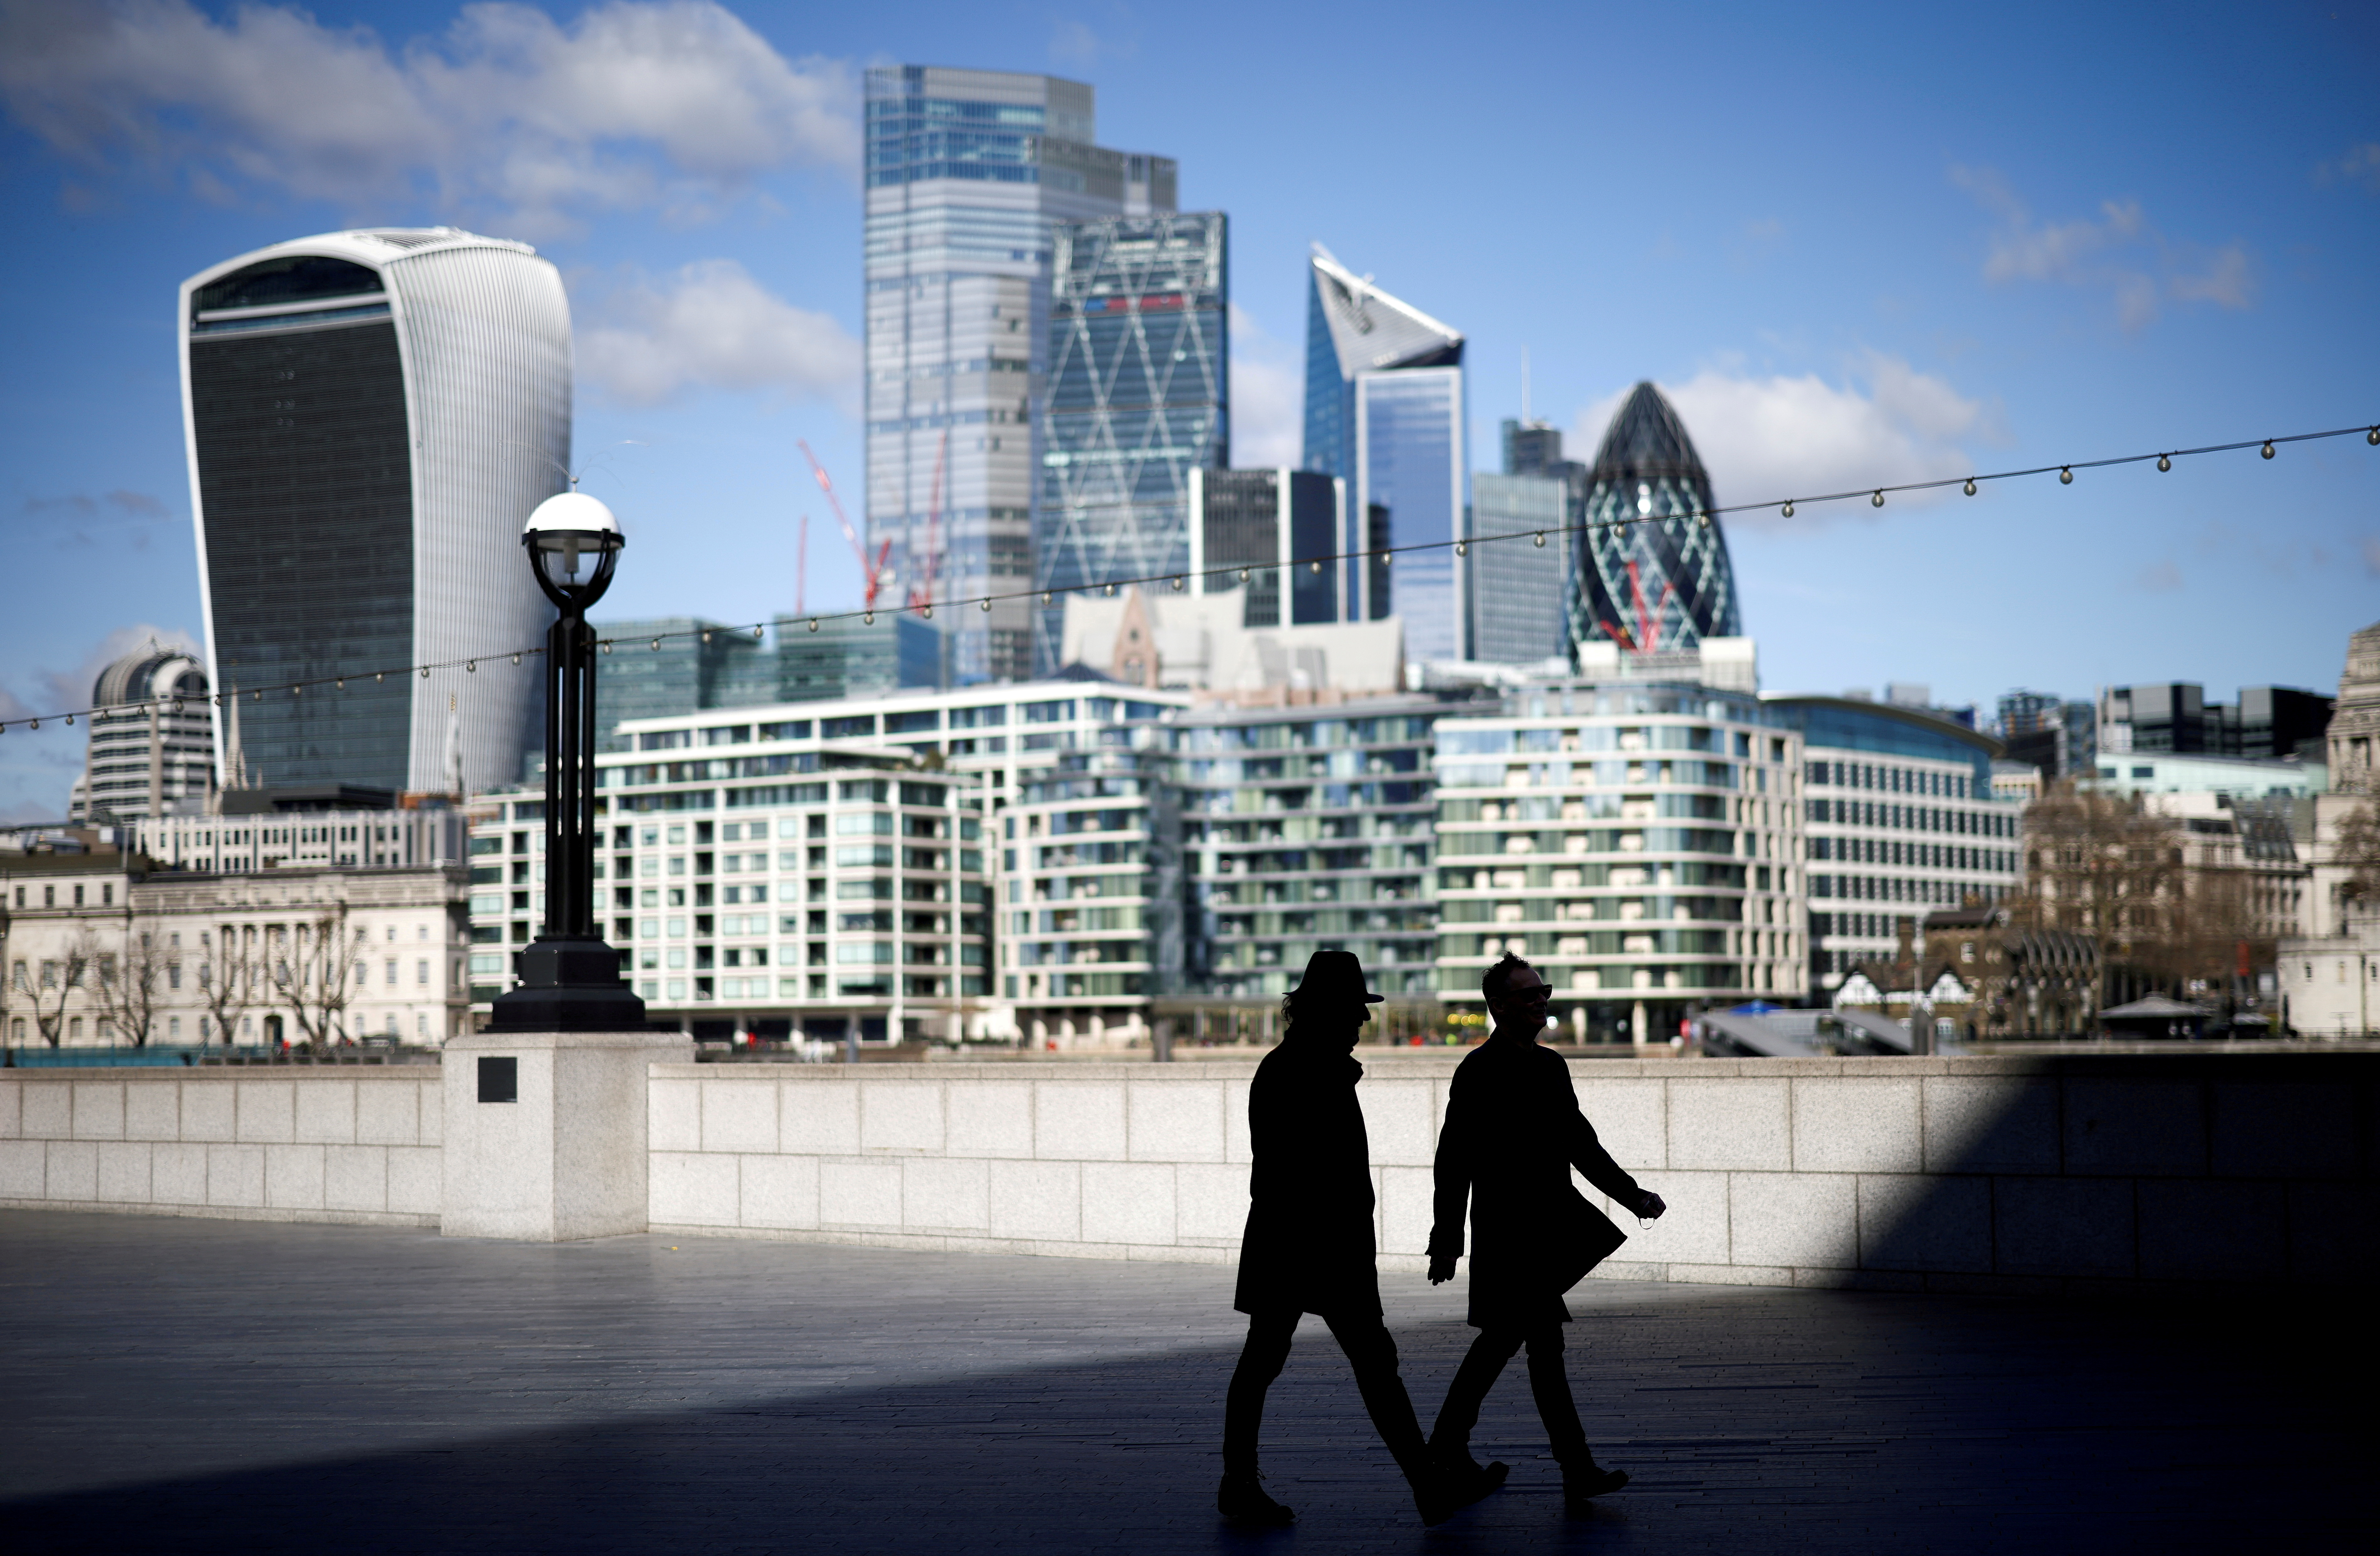 The City of London financial district can be seen as people walk along the south side of the River Thames